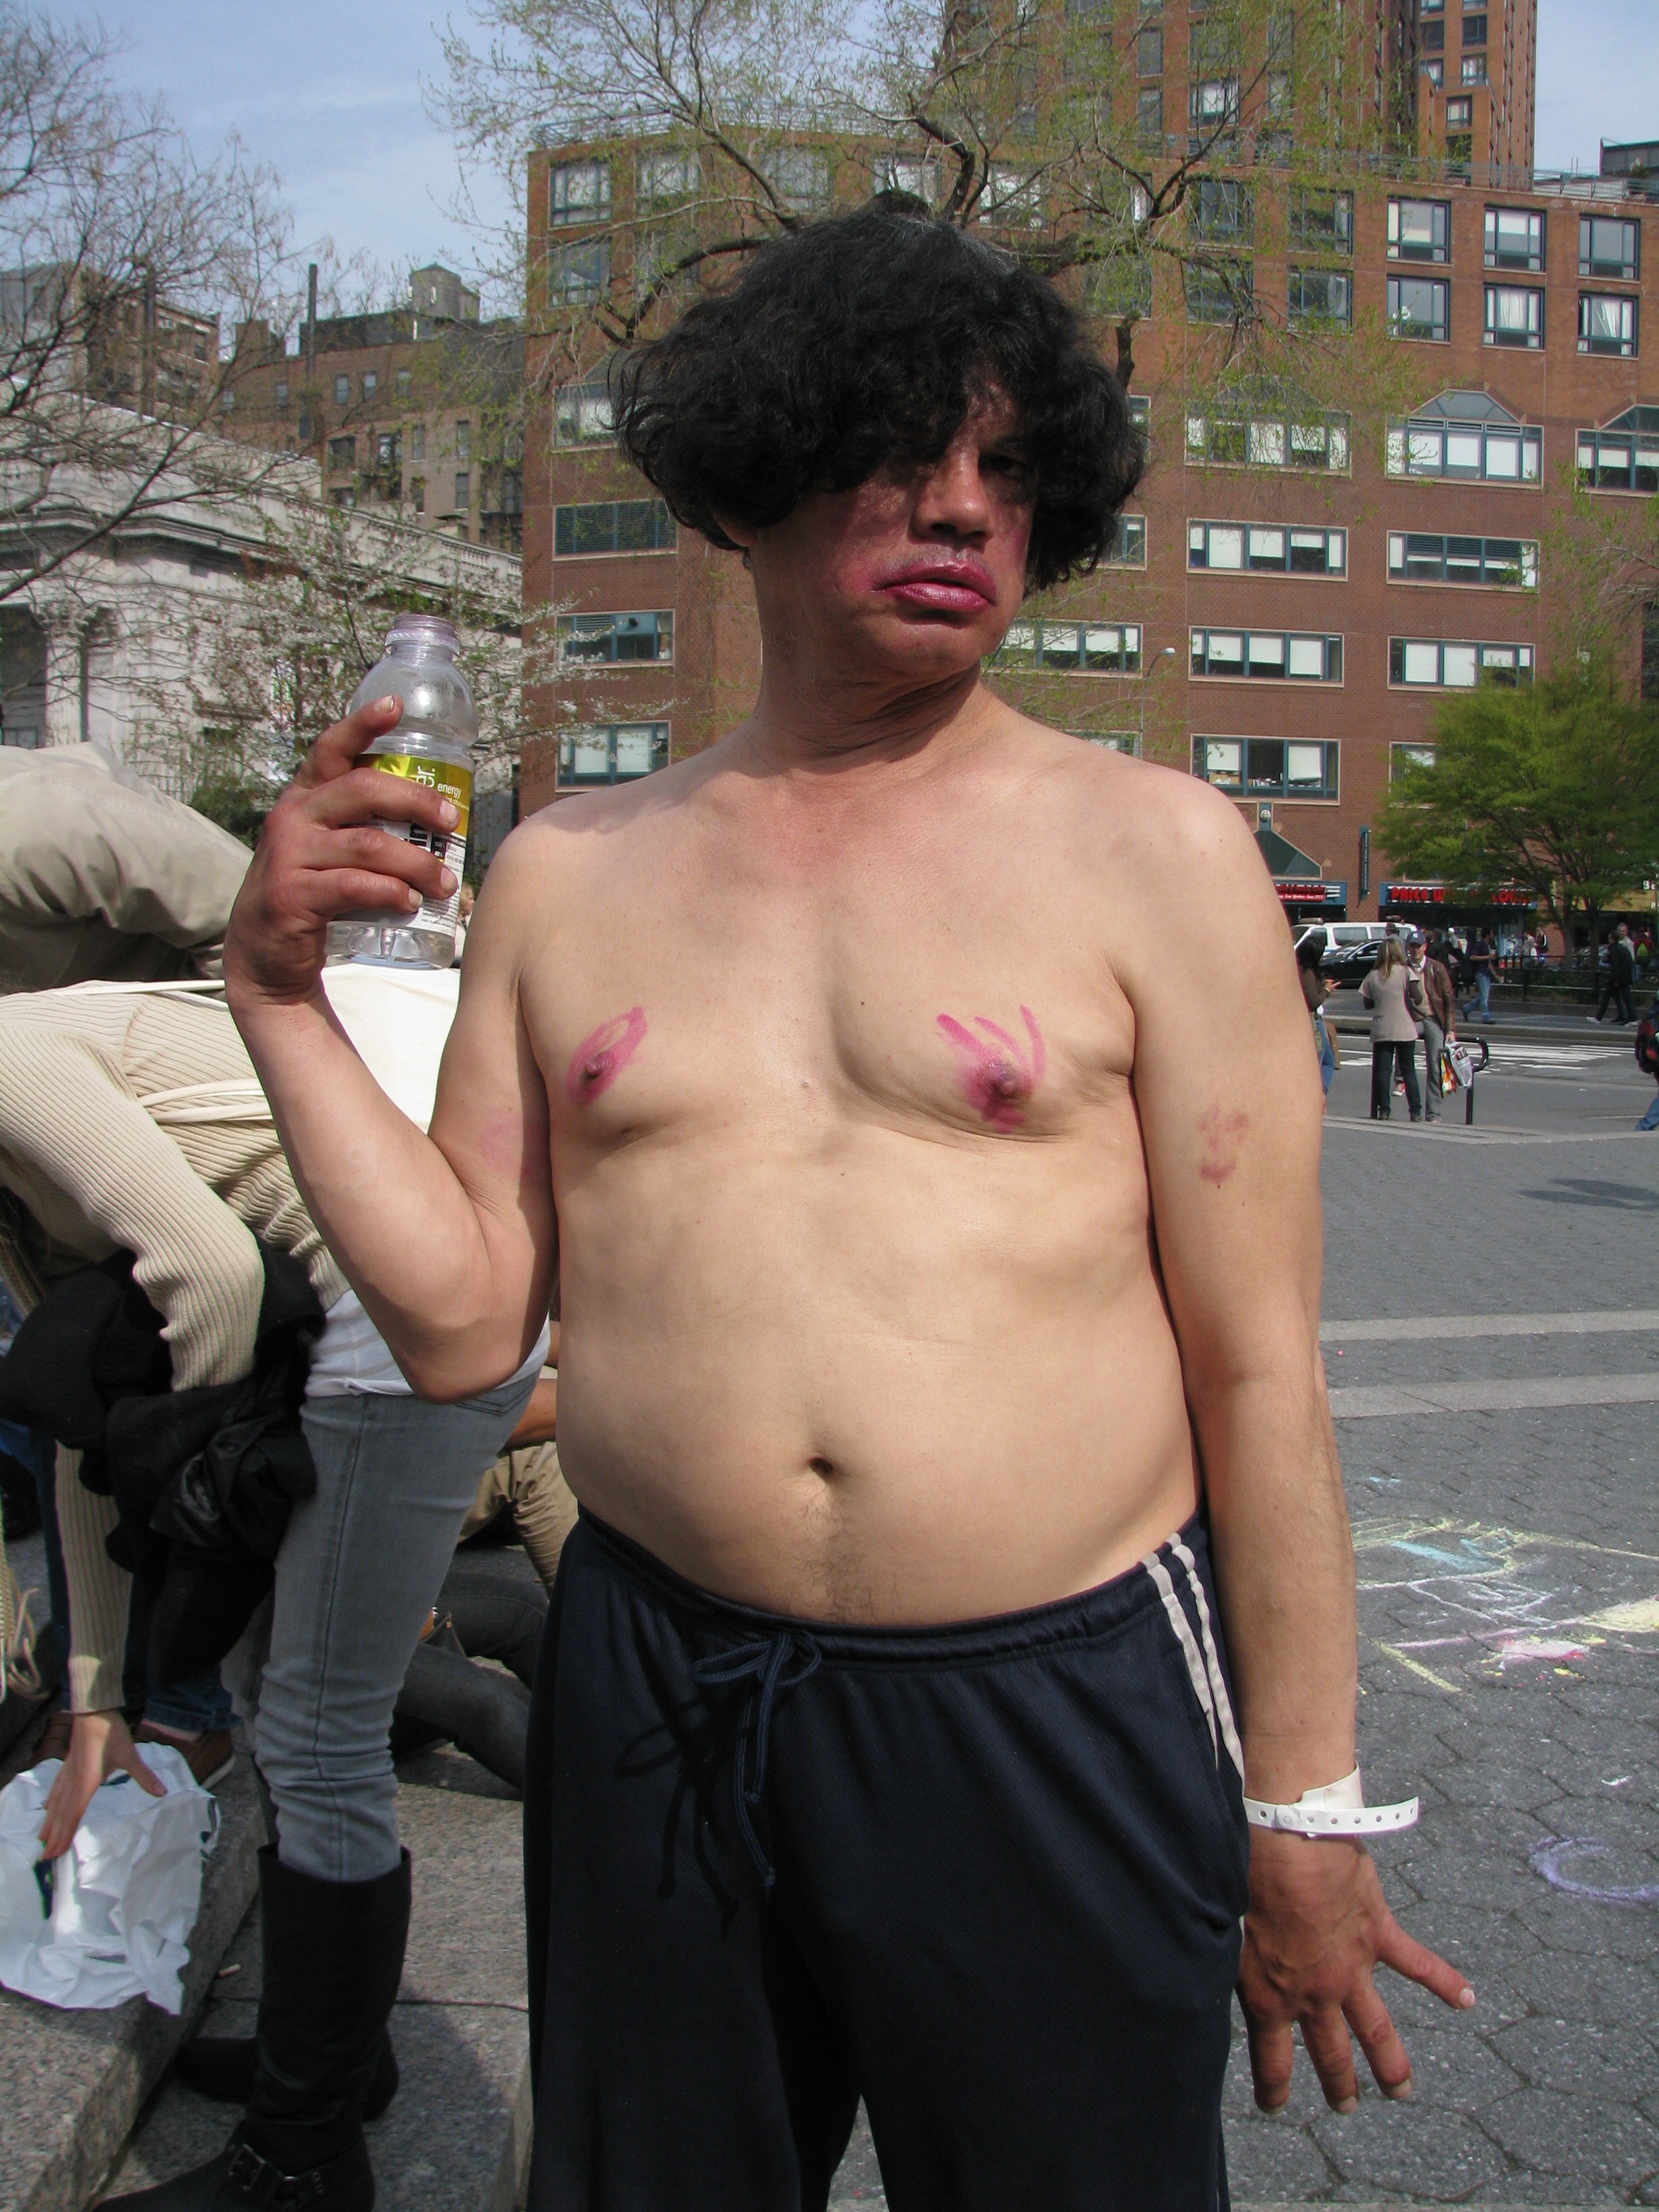 Weird man with lipstick on his nipples